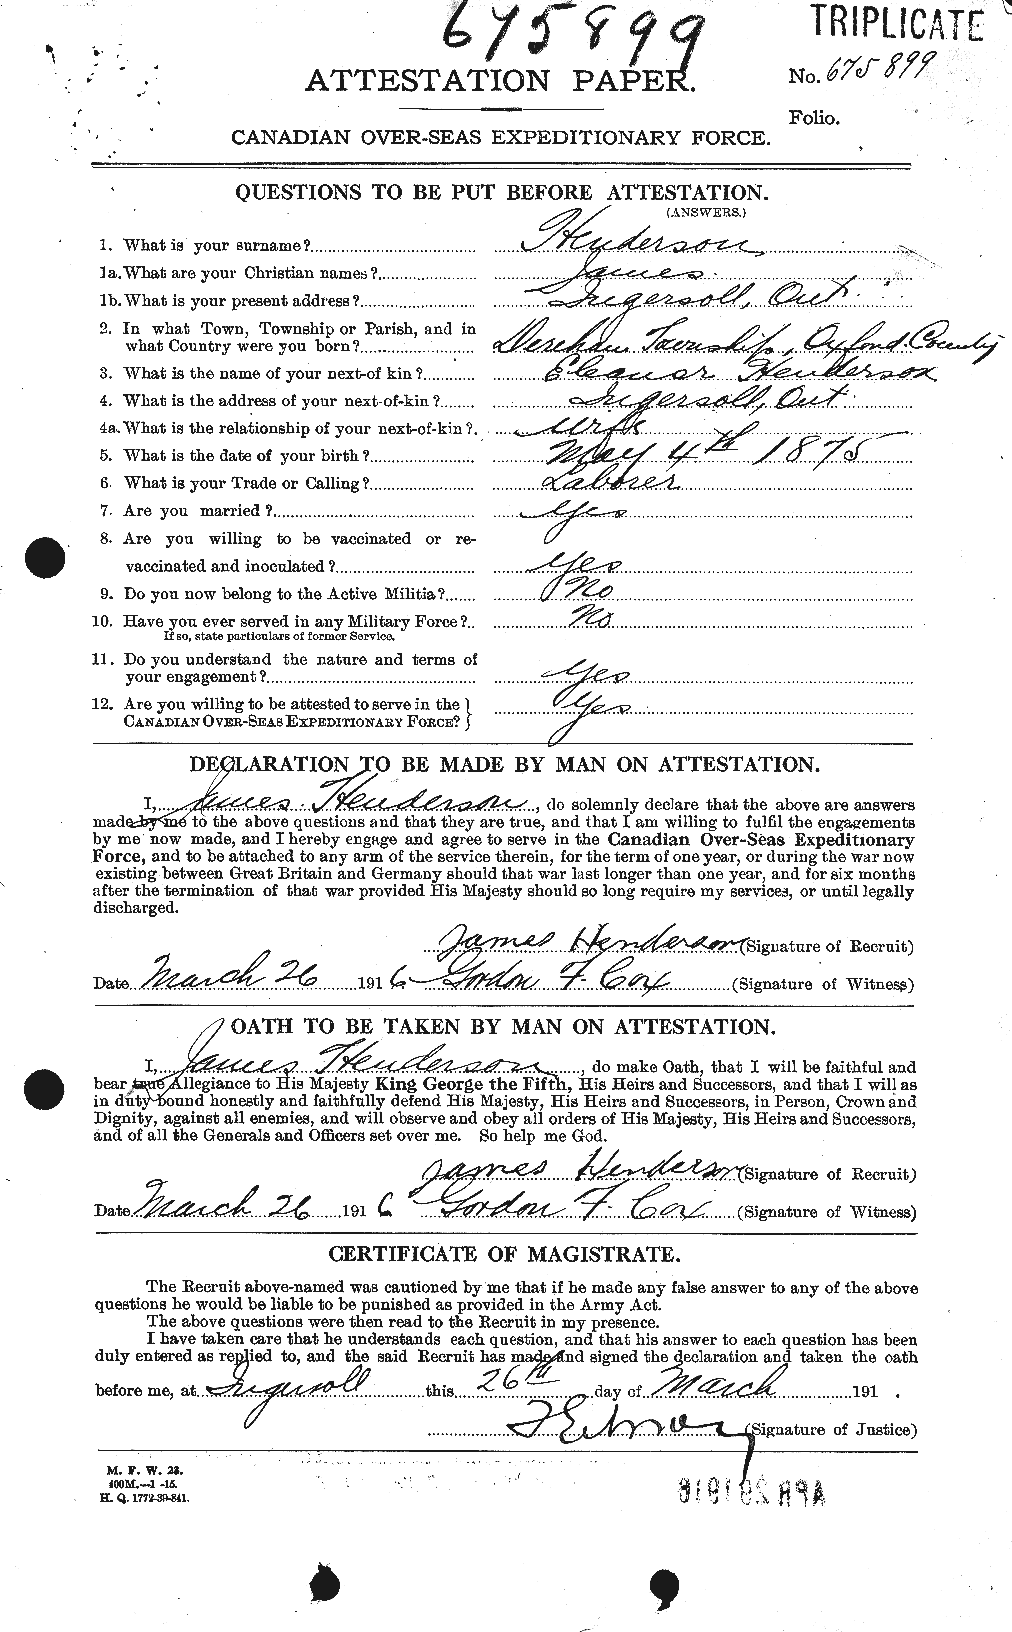 Personnel Records of the First World War - CEF 390352a